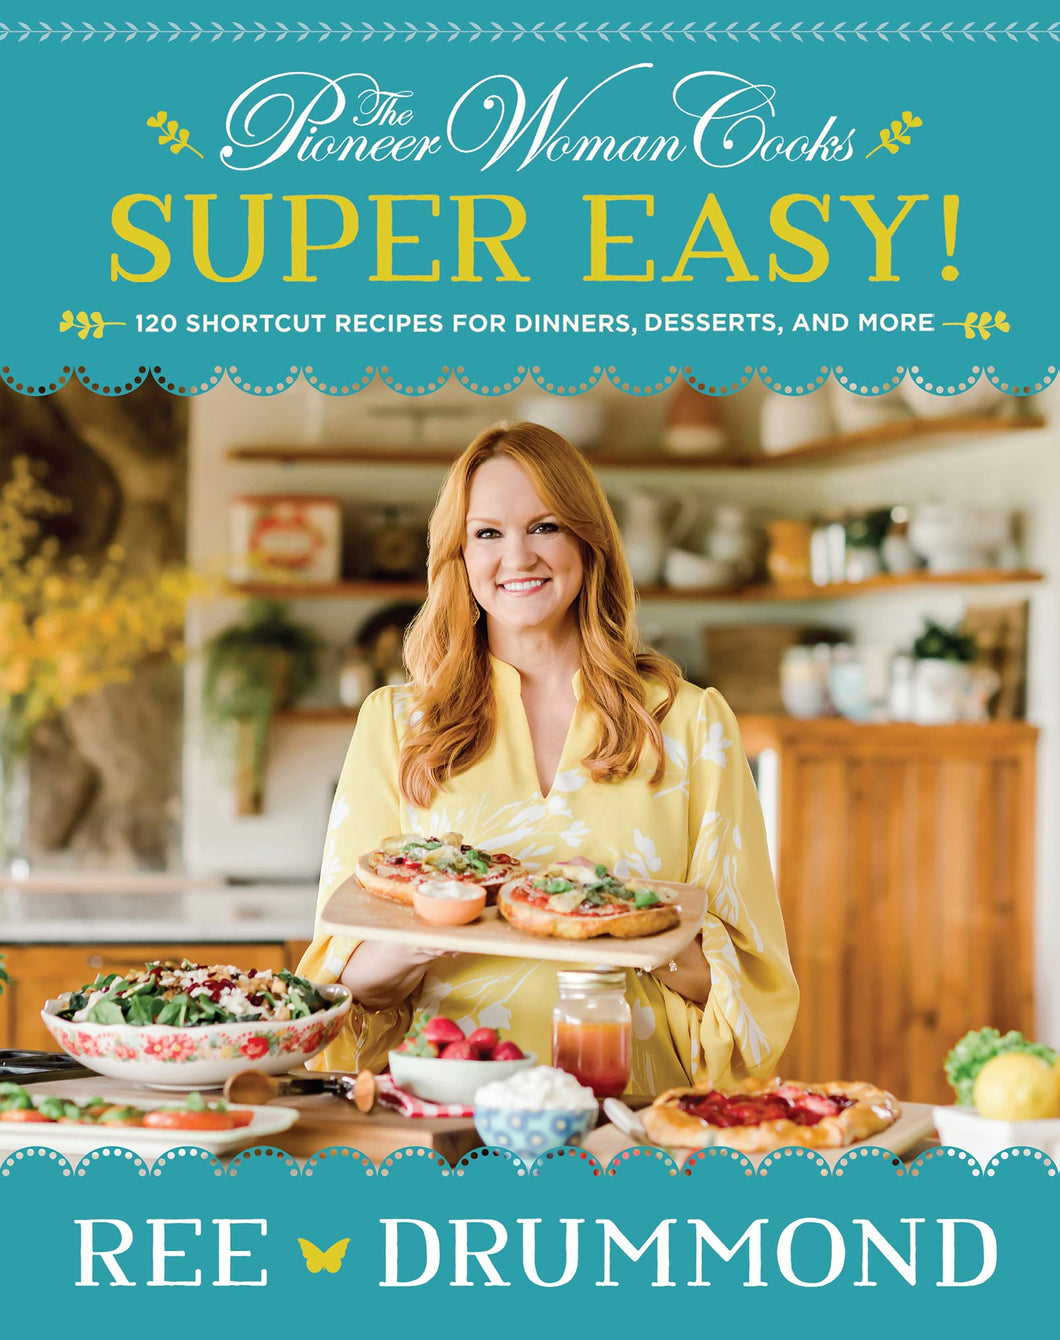 The Pioneer Woman Cooks―Super Easy!: 120 Shortcut Recipes for Dinners, Desserts, and More